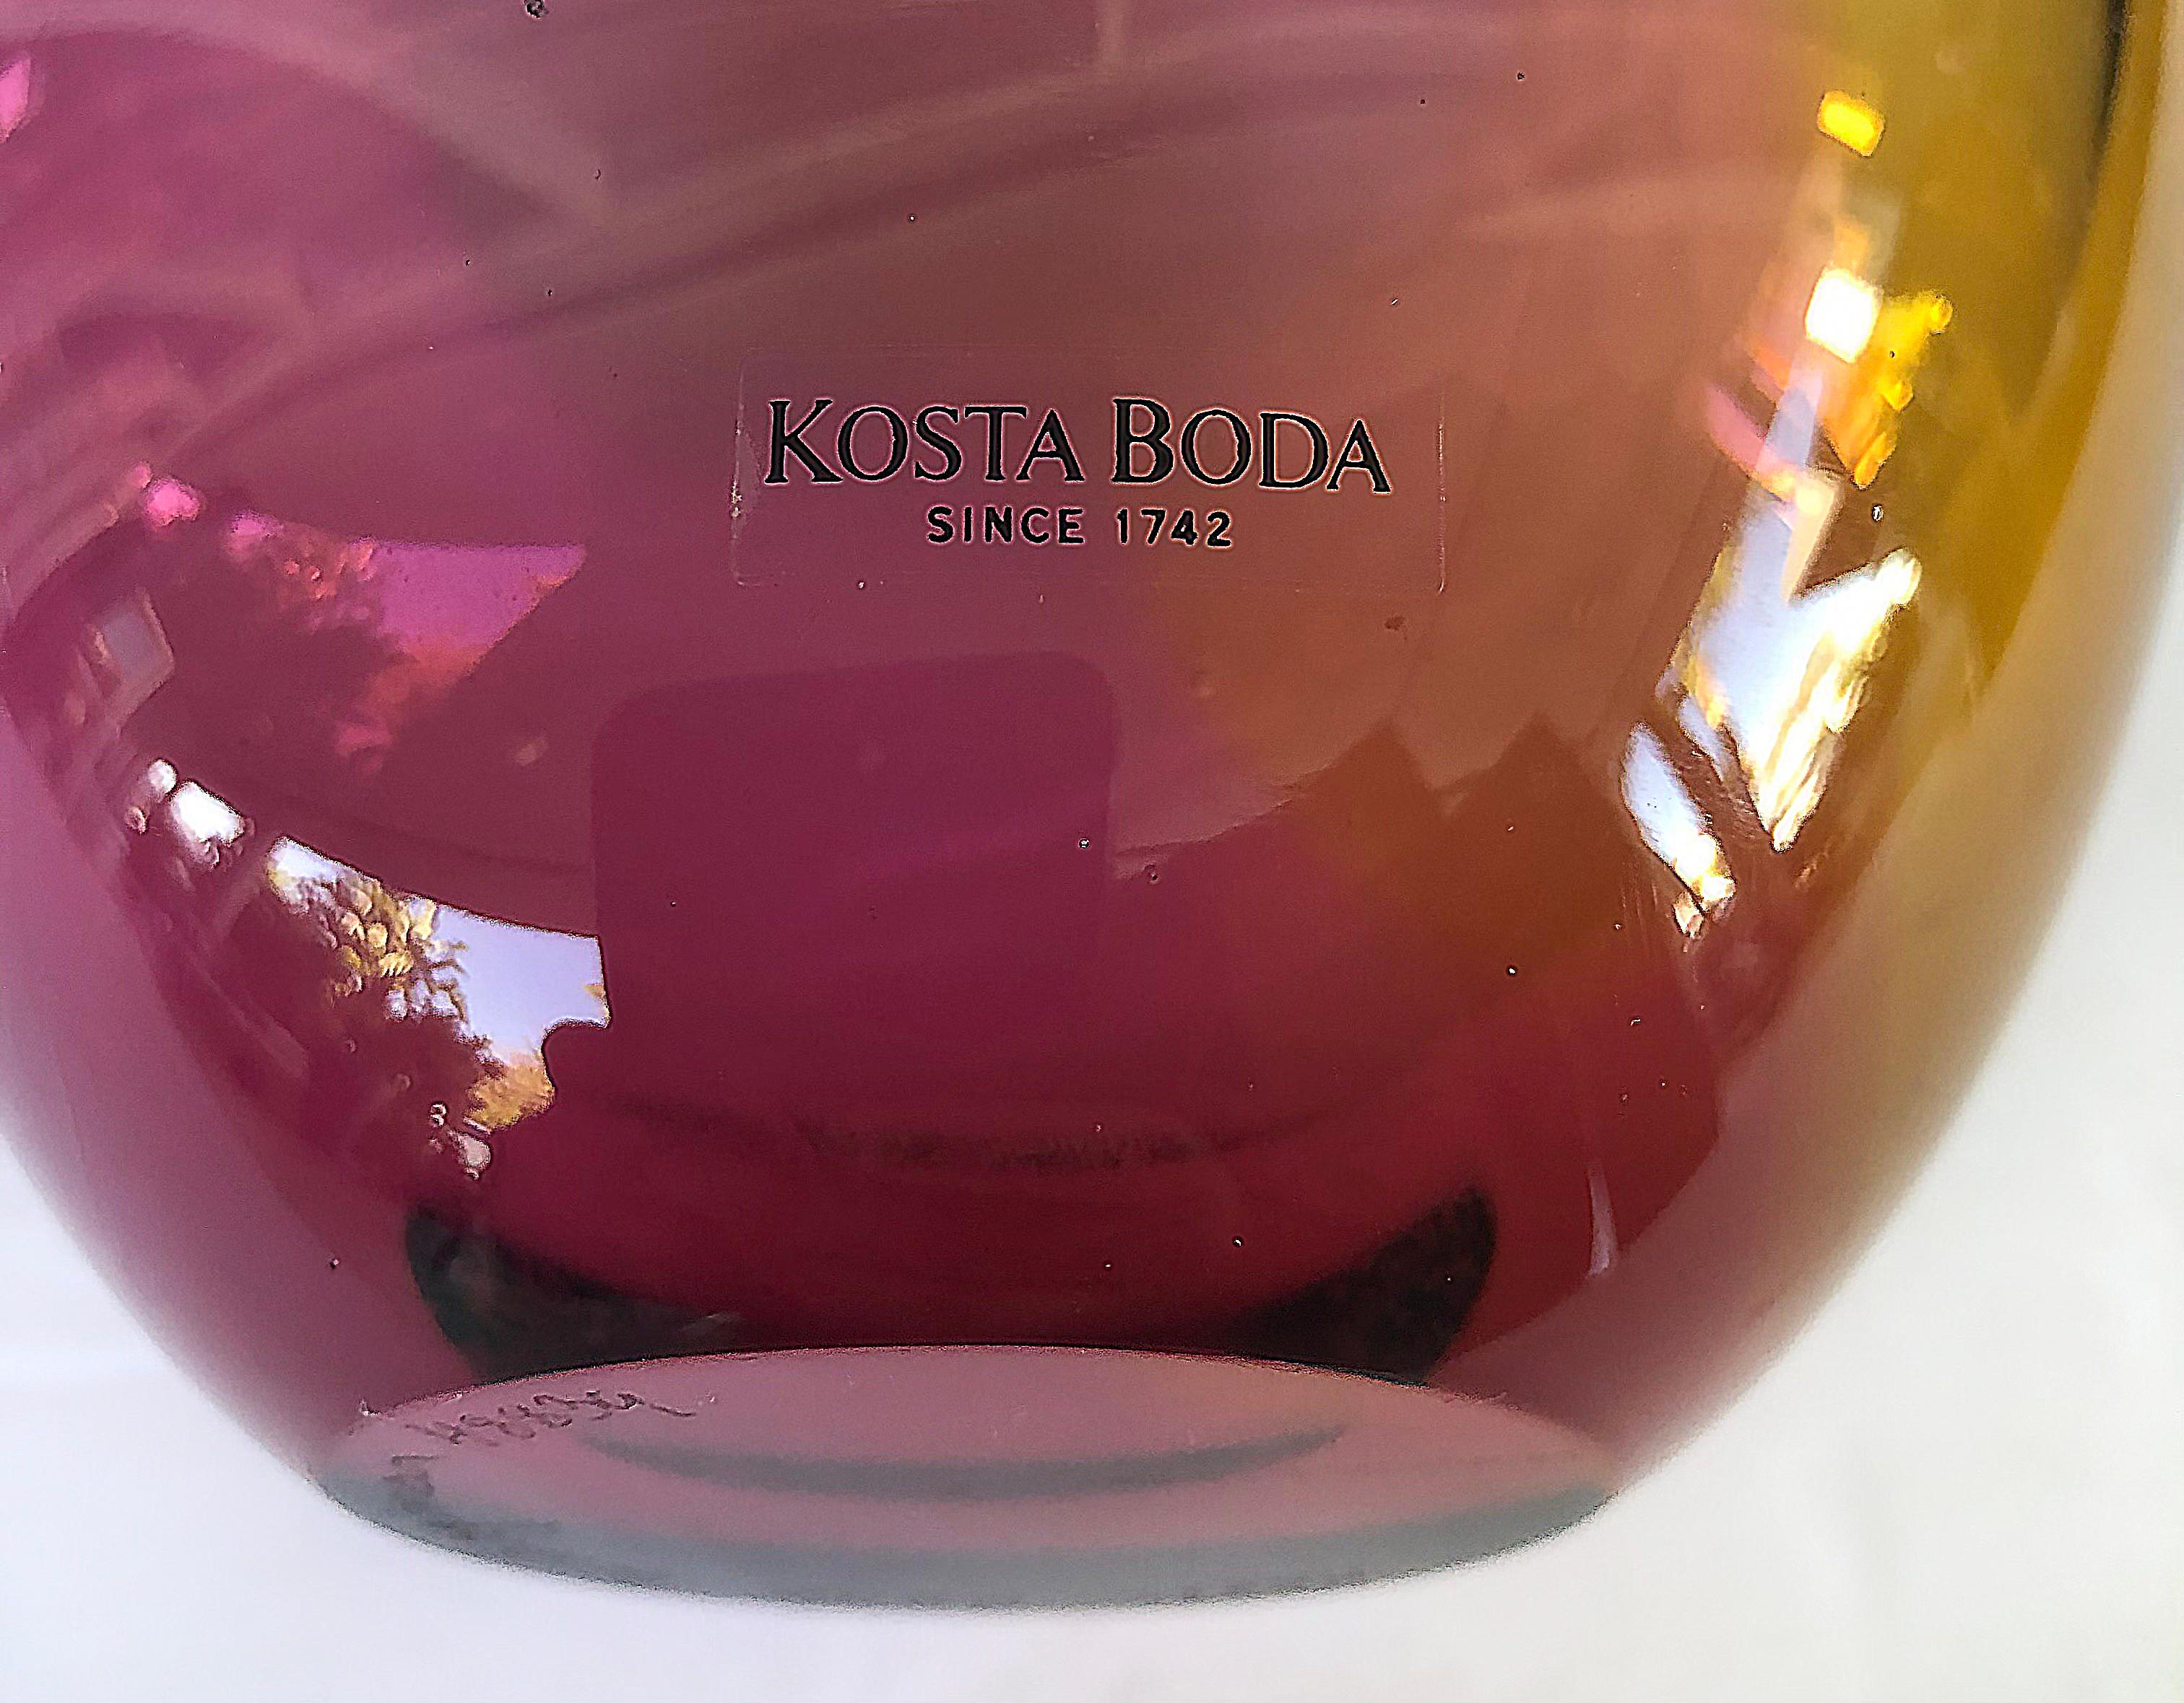 Kosta Boda art glass Fidji bottle vase by Kjell Engman

Offered for sale is a medium-size Kosta Boda art glass Fidji bottle vase by Kjell Engman. The blown glass vase is signed and numbered on the base and the vase retains the original label.